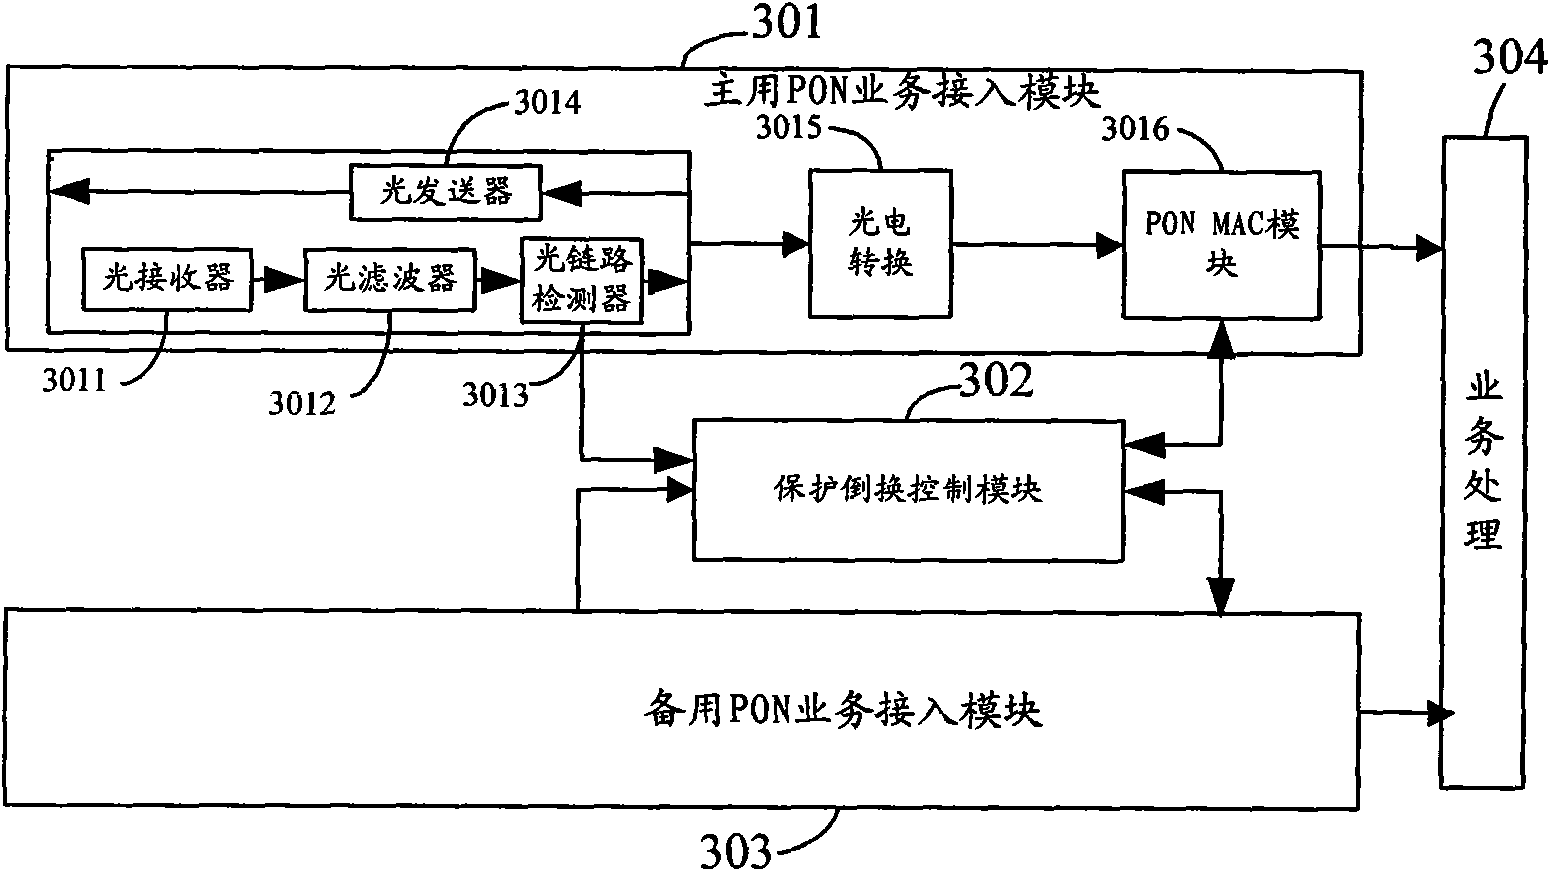 Device for realizing protection switching in wavelength division multiplexing passive optical network (WDM PON), system and method therefor